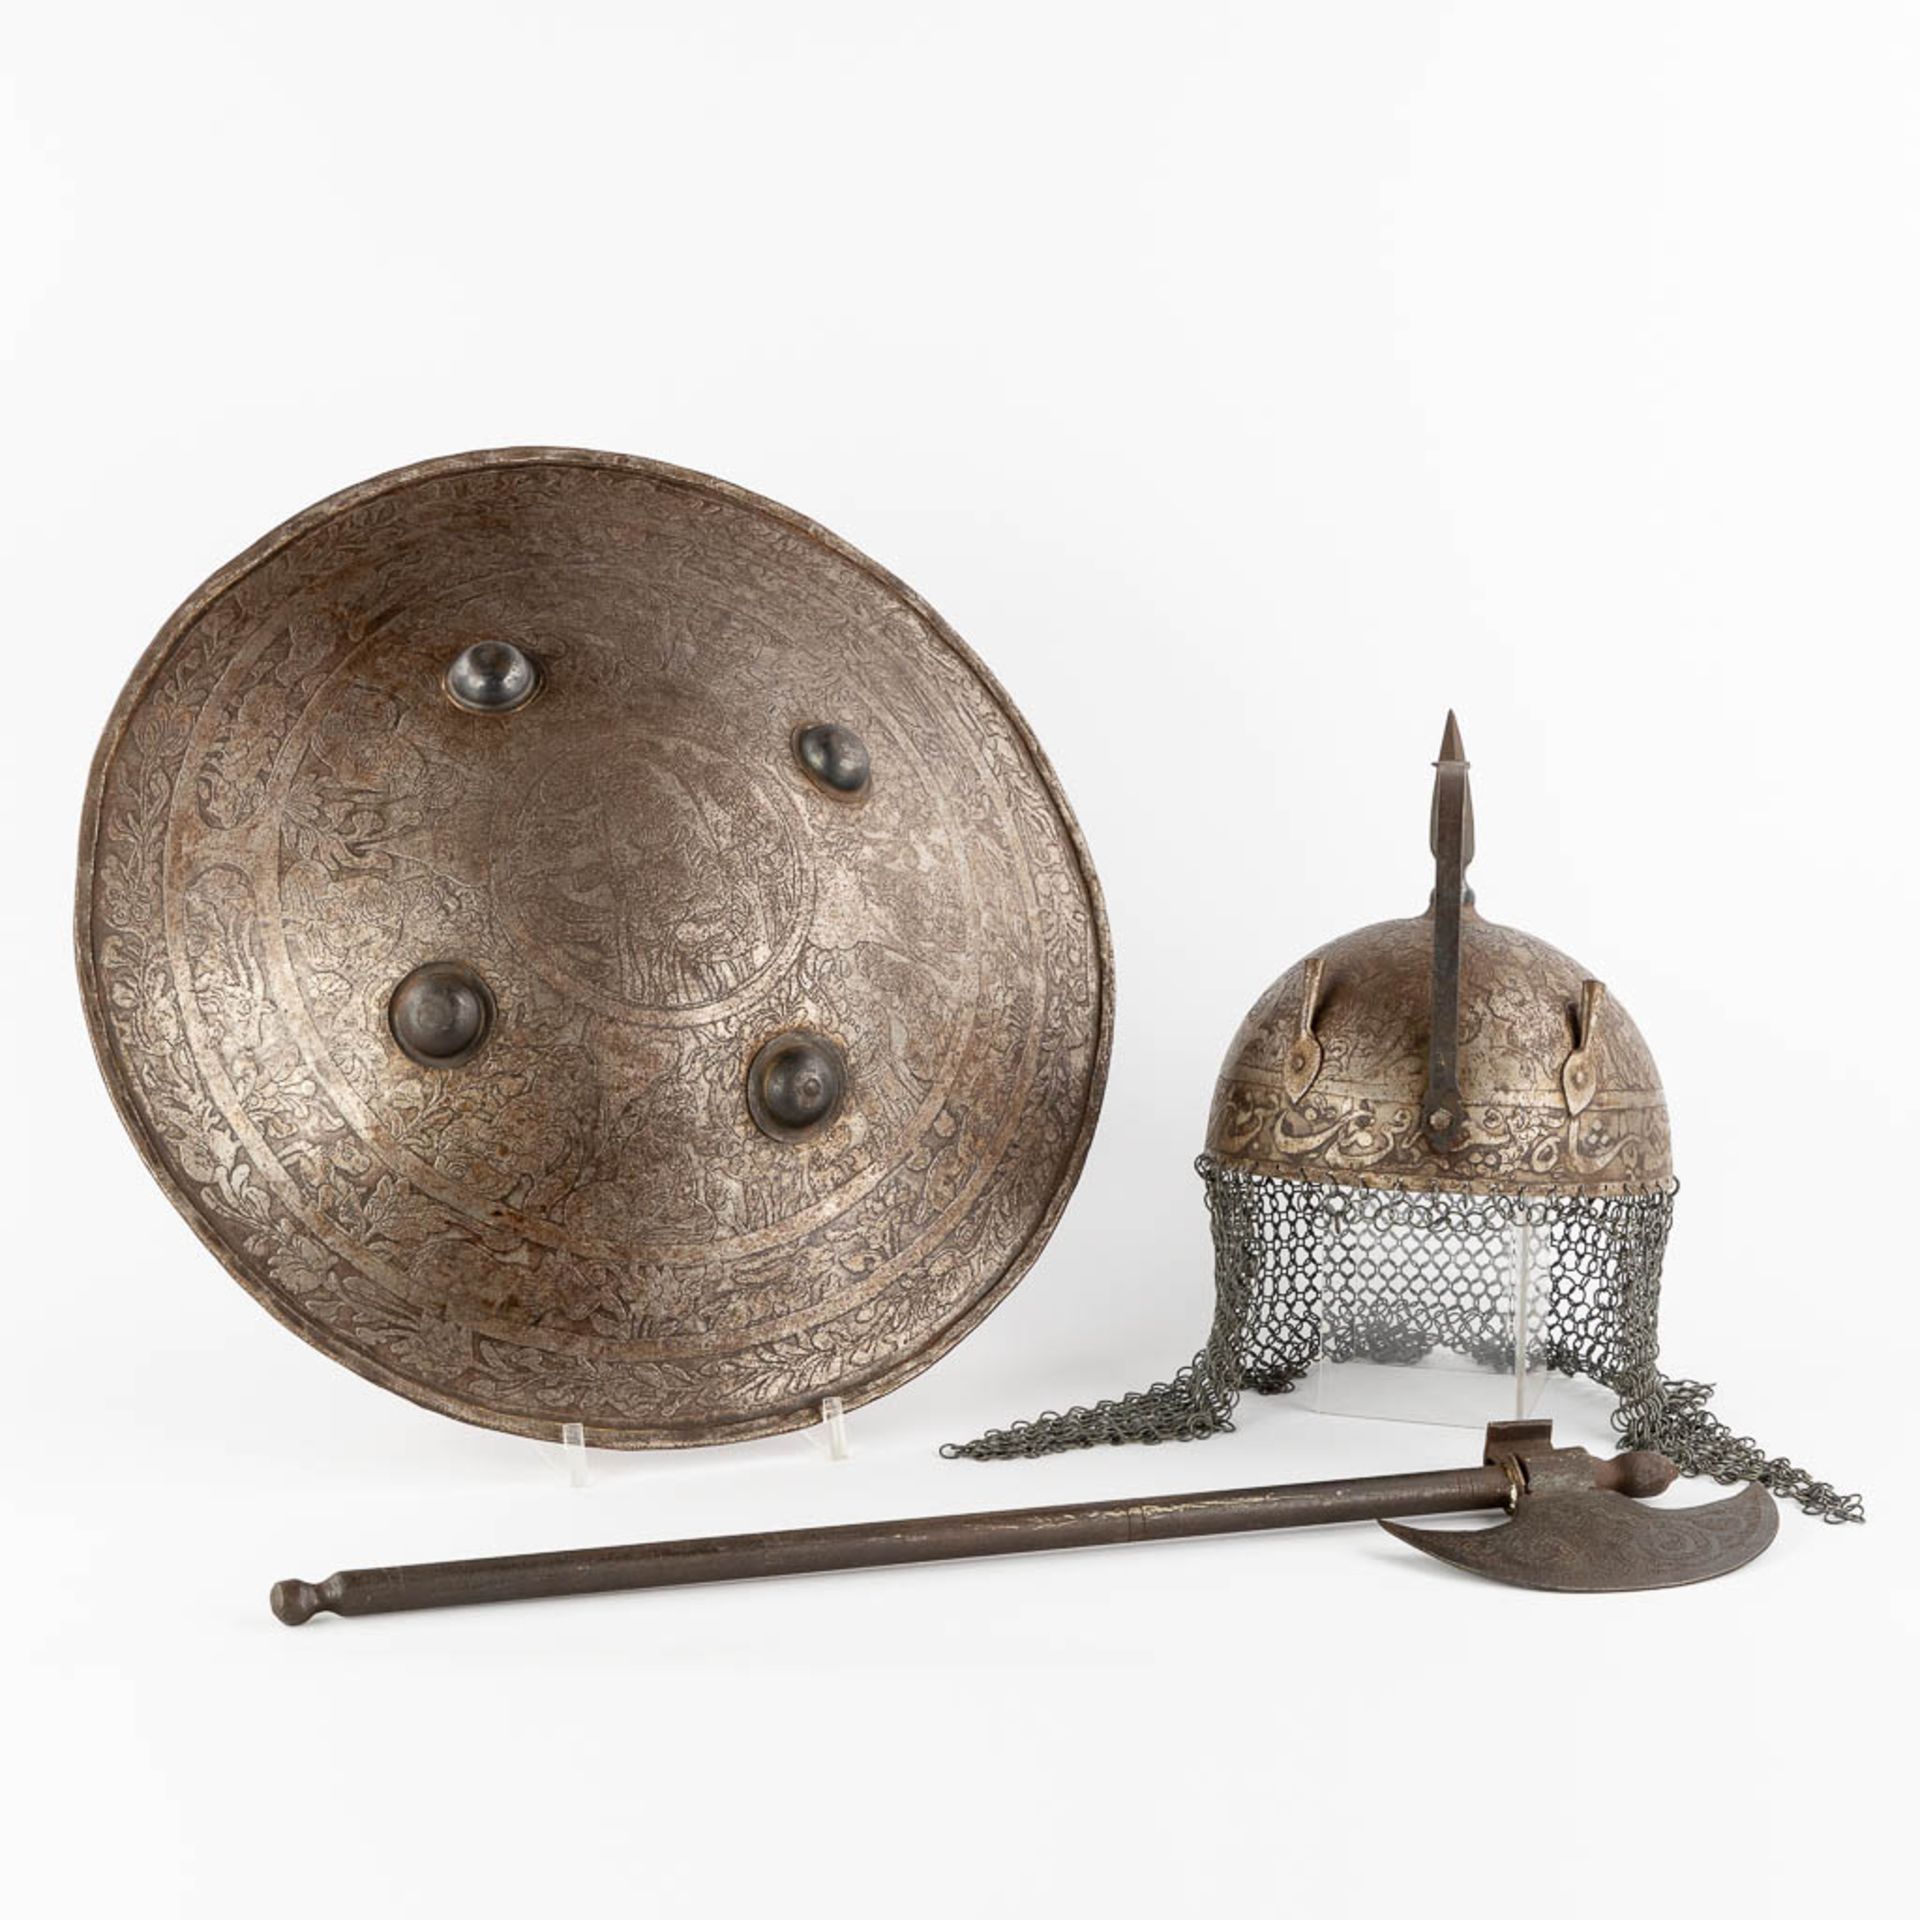 A decorative shield, axe and helmet in Ottoman style. 20th C. (D:48 cm)